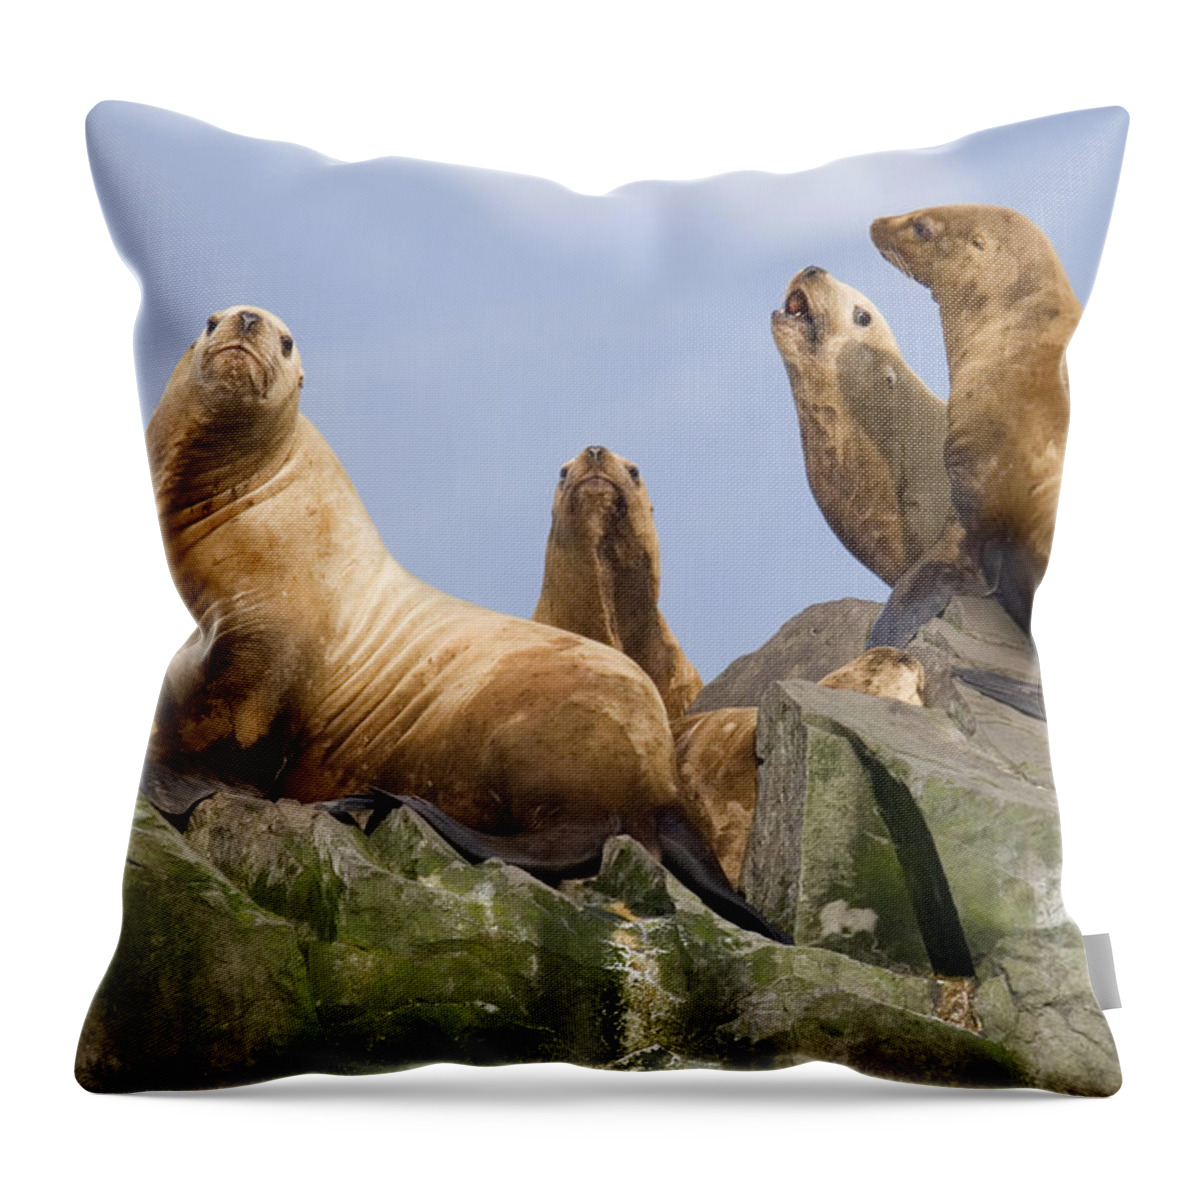 00999028 Throw Pillow featuring the photograph Stellers Sea Lions Sunning by Flip Nicklin